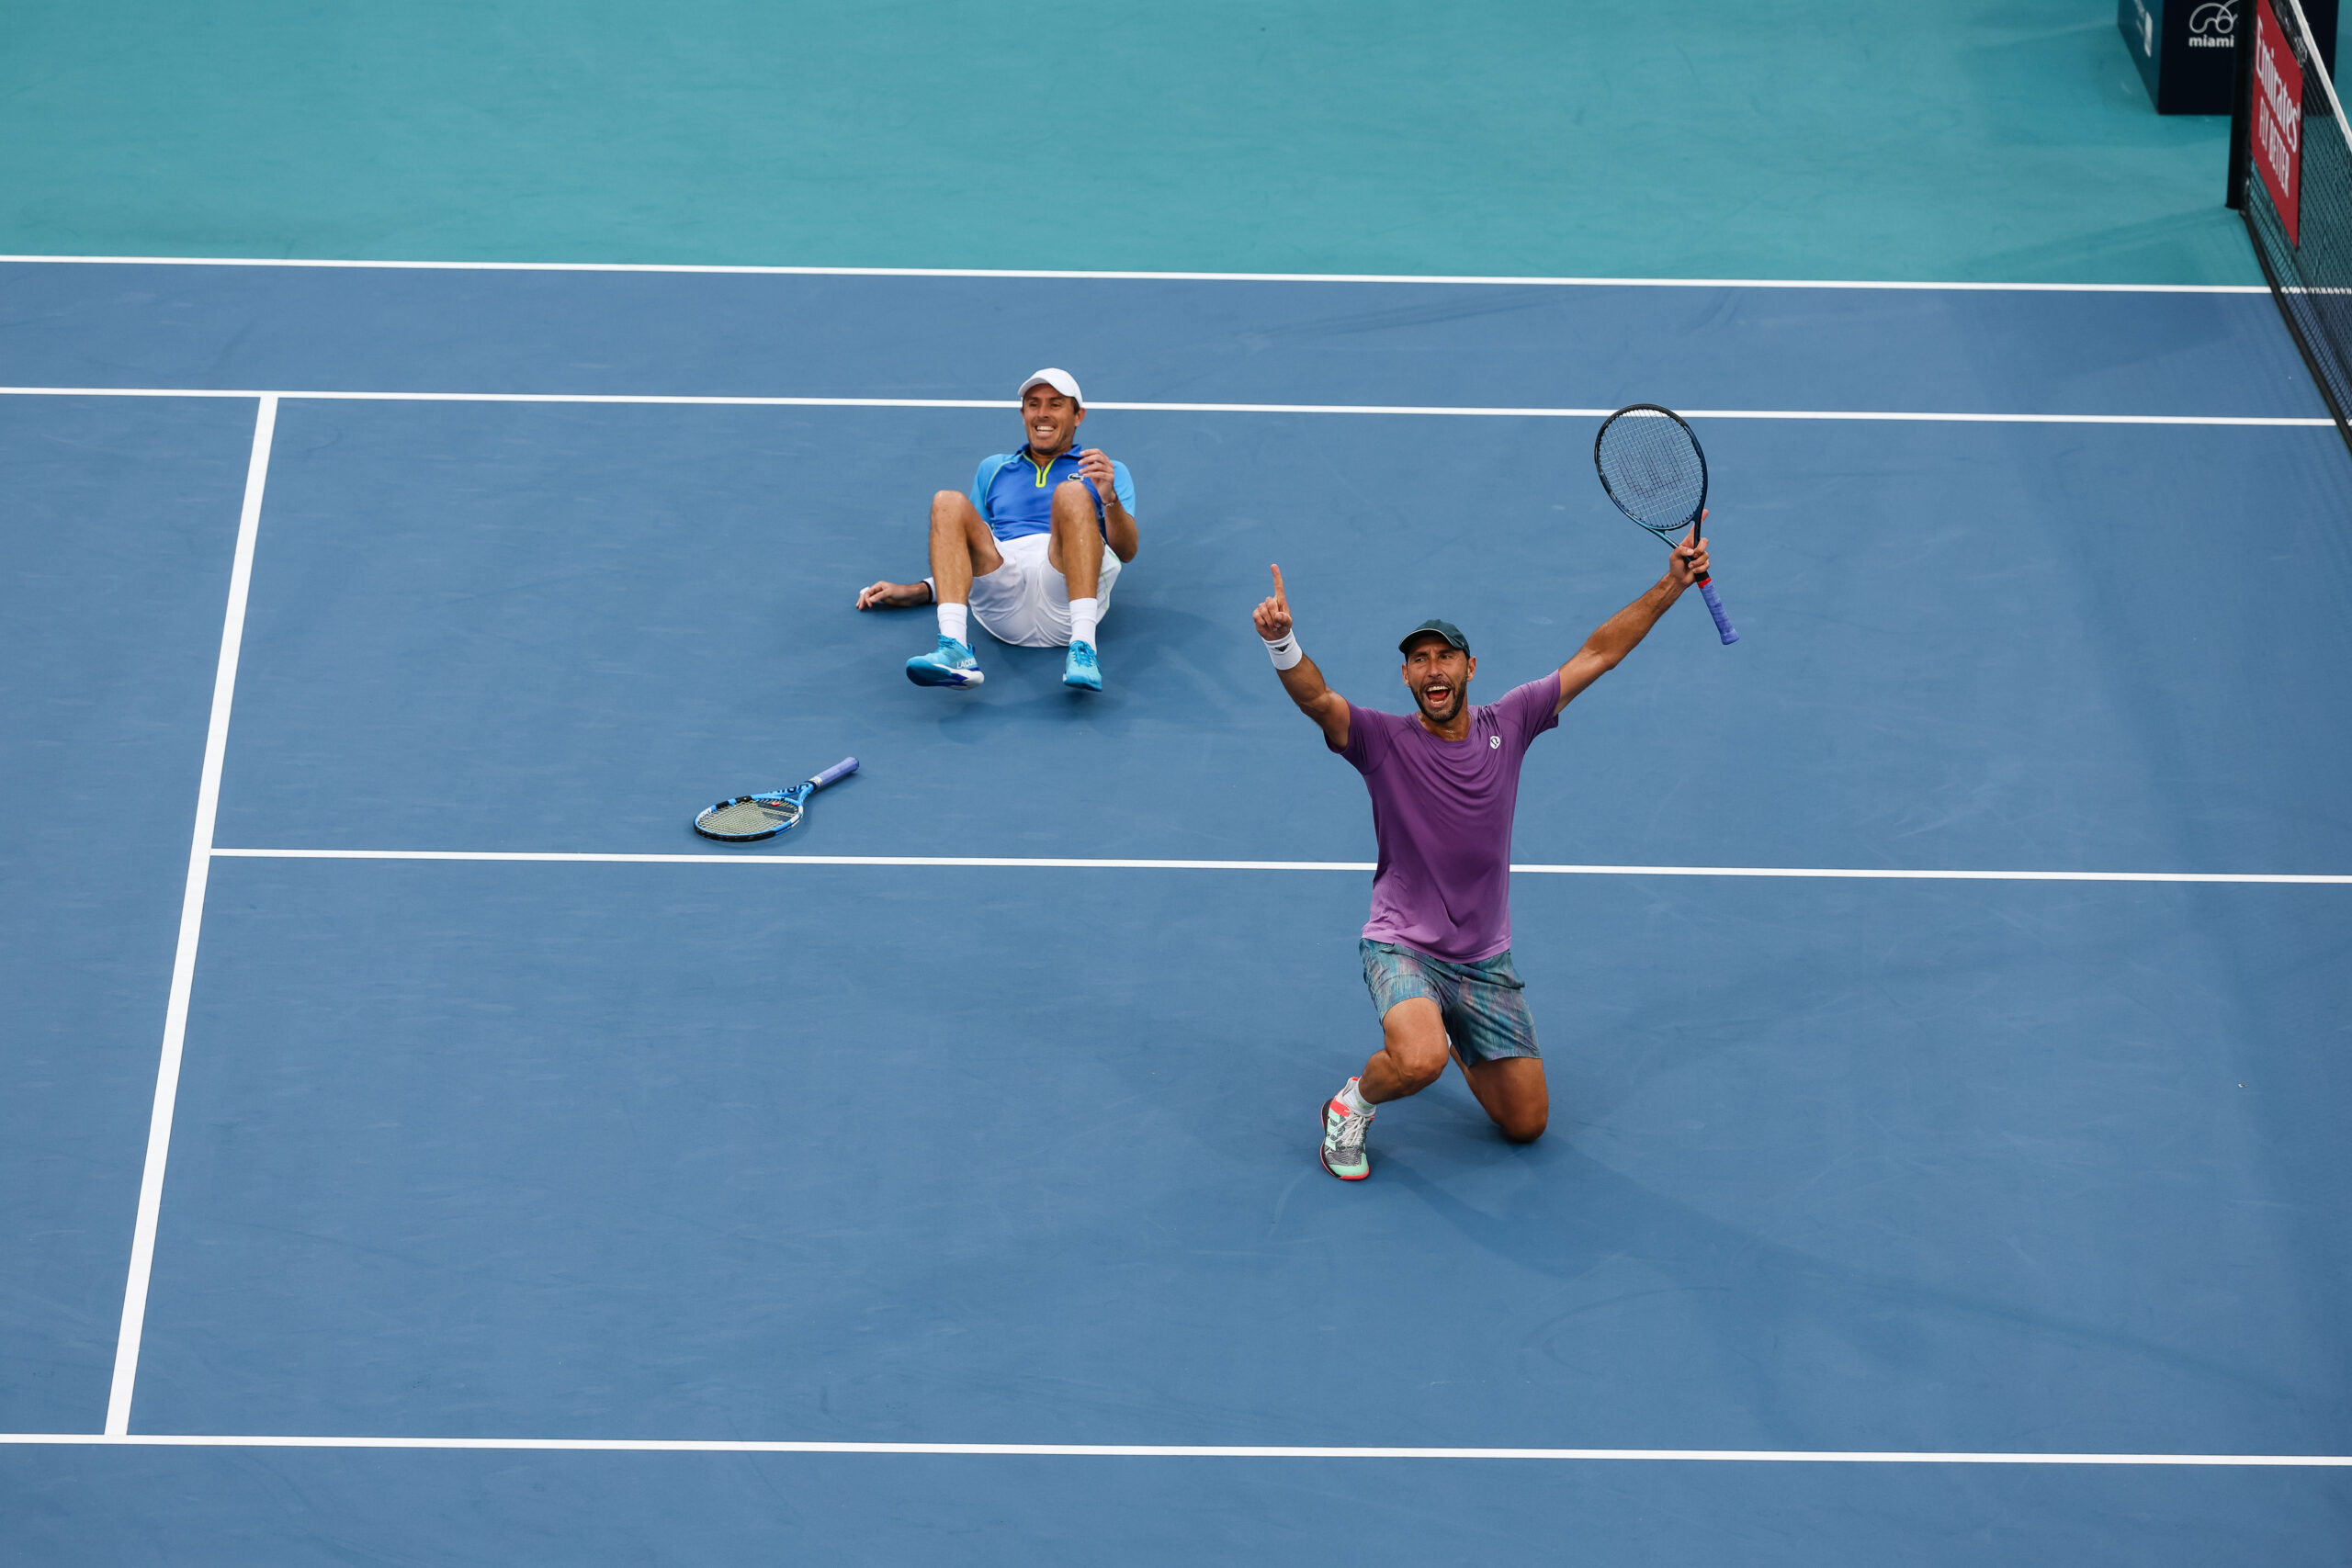 Edouard Roger-Vasselin on the ground while partner Santiago Gonzalez raises his arms after defeating his opponents and reaching the finals of the 2023 Miami Open doubles tournament in Miami Gardens, Florida.